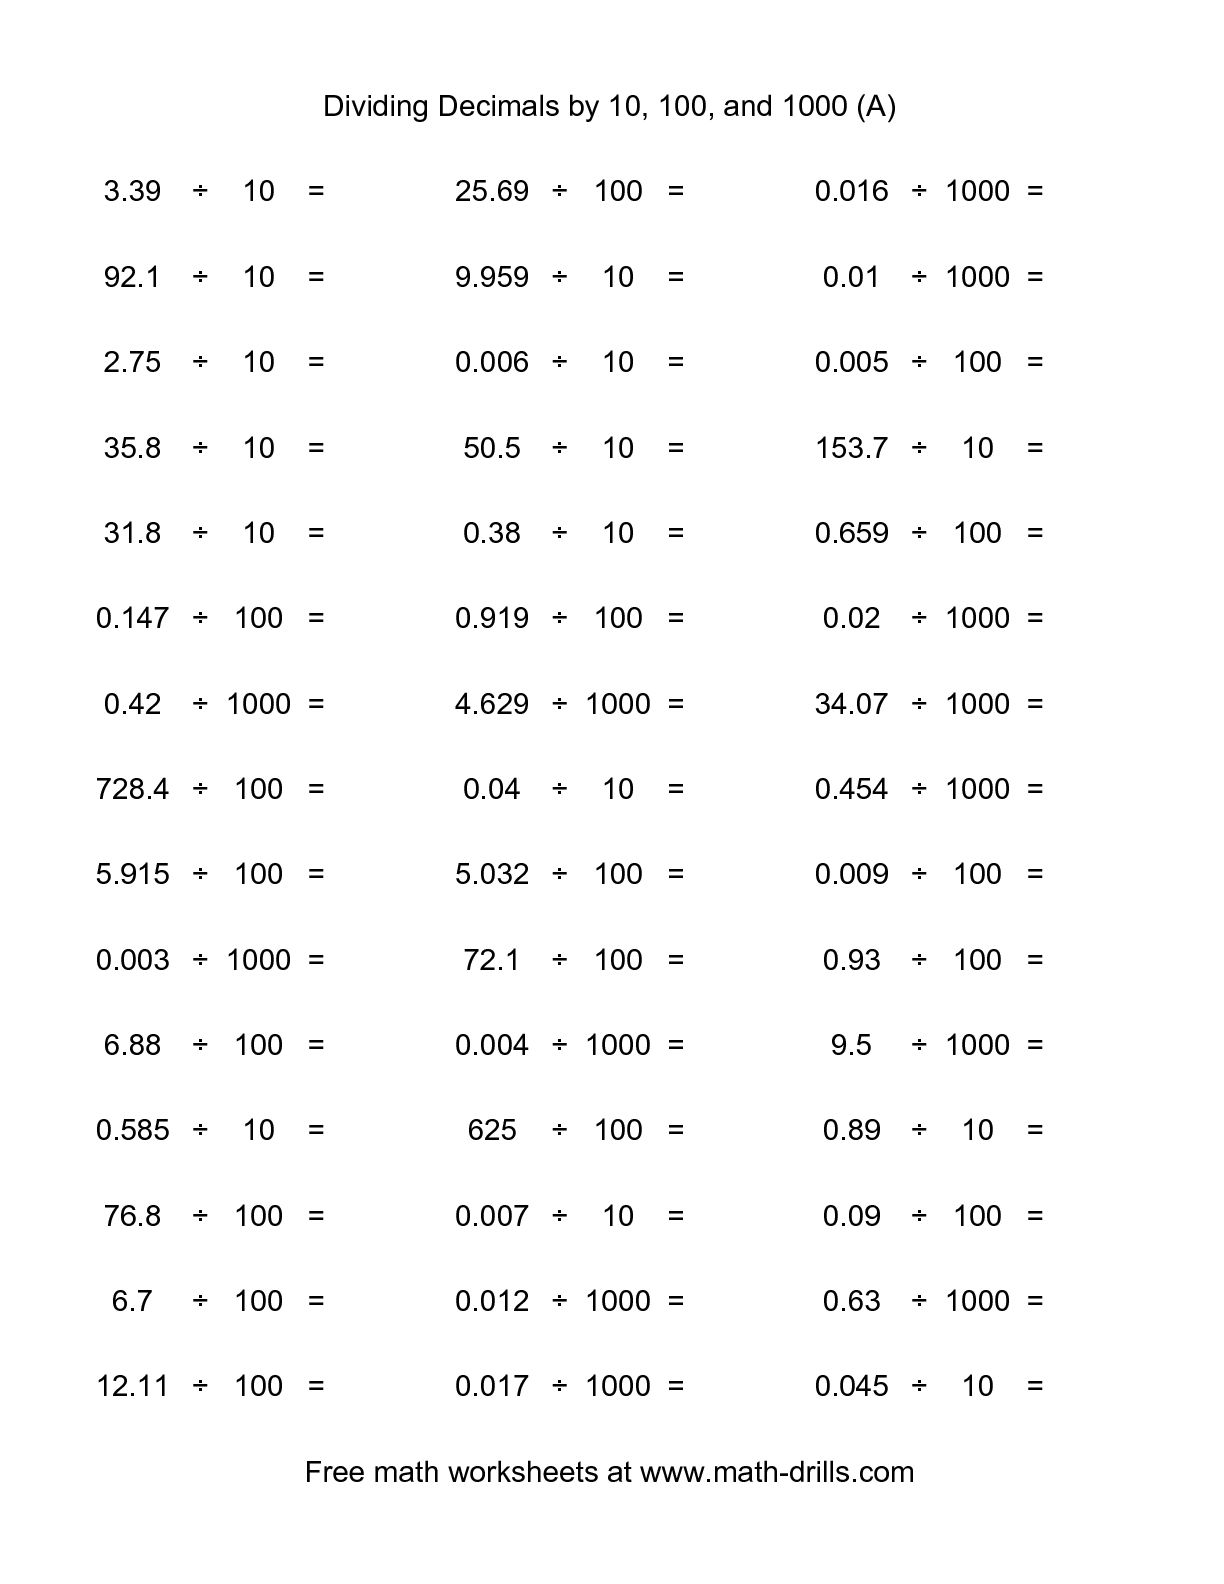 Dividing Decimals By Whole Numbers Worksheets Grade 5